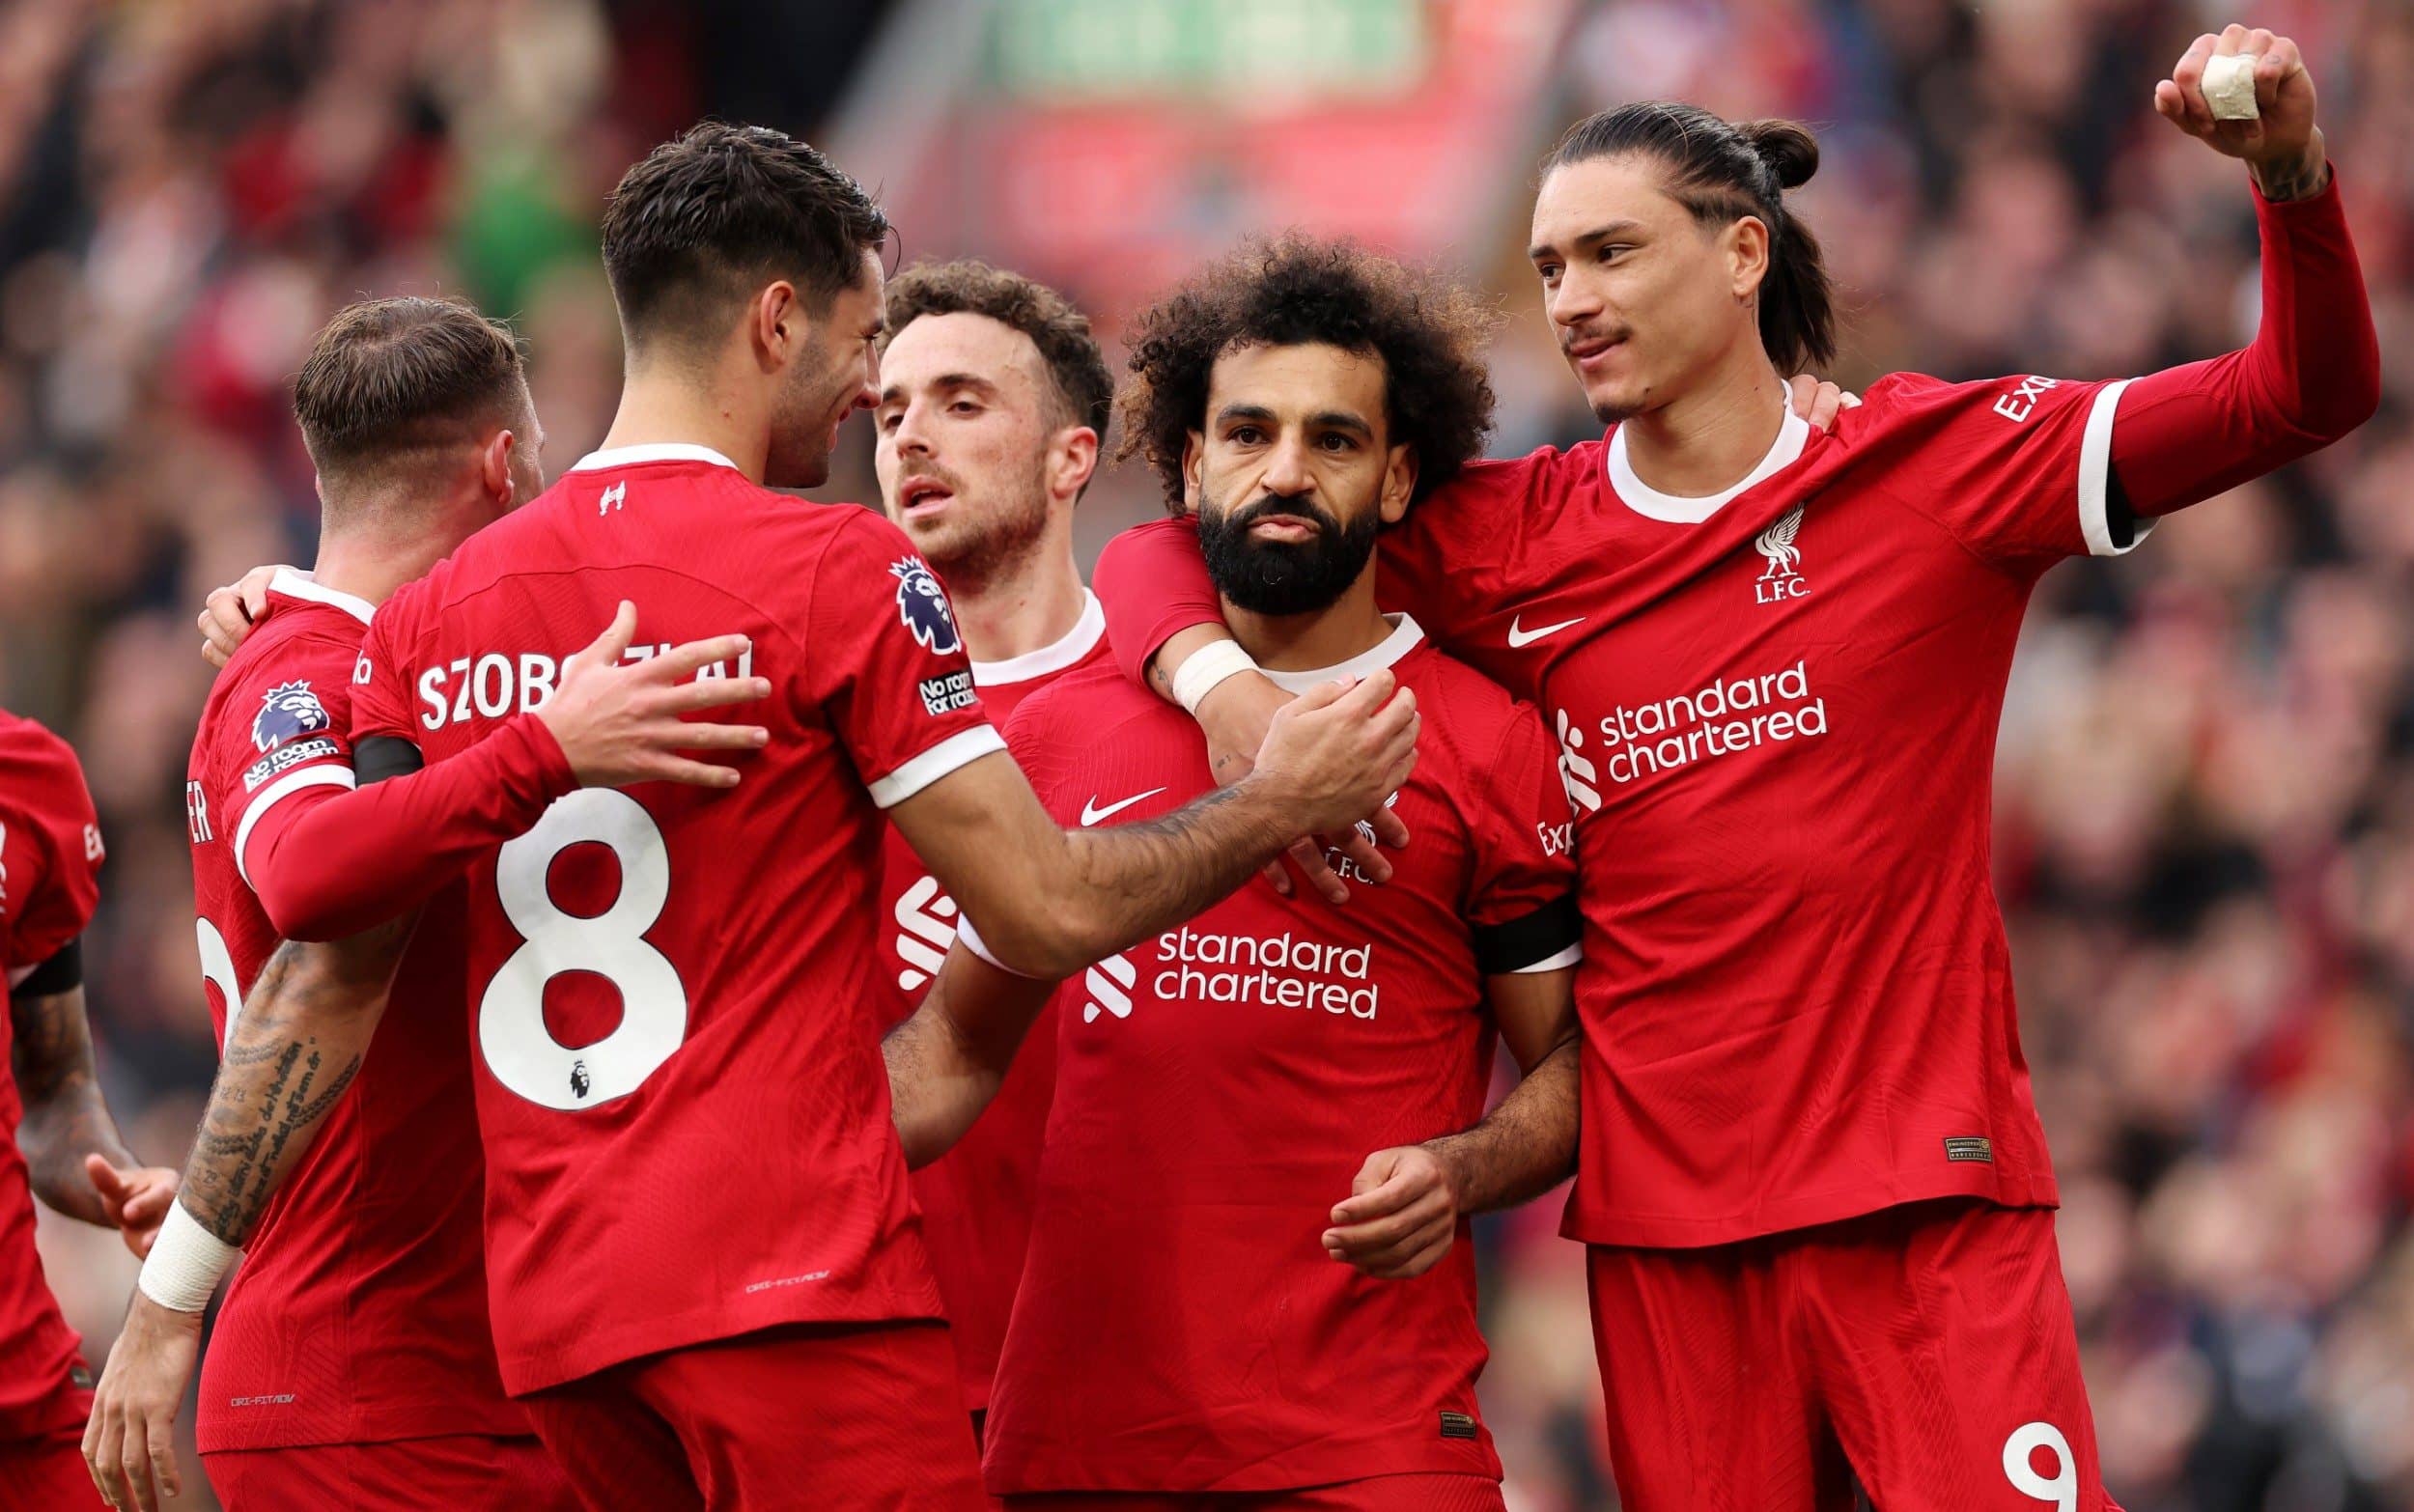 All Hail Mo Salah As Liverpool Leads EPL Table After Beating 10-Man Everton